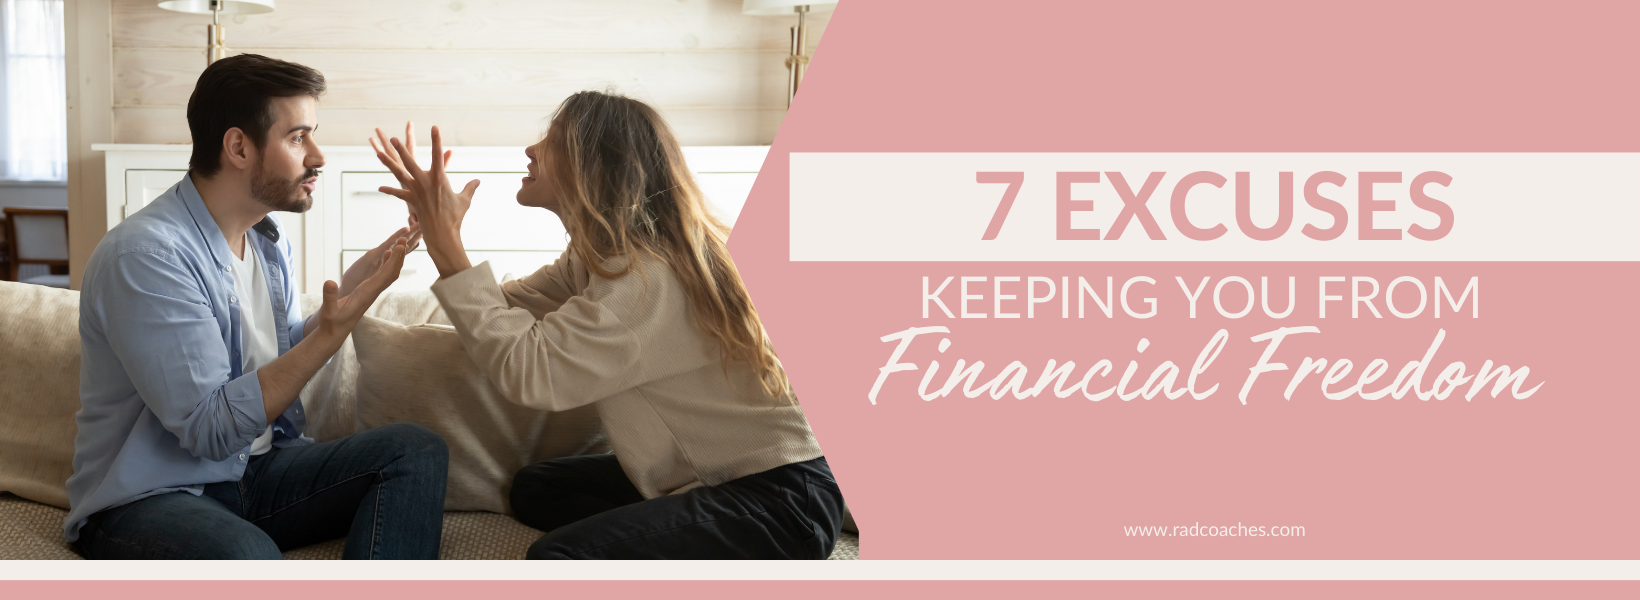 excuses keeping you from financial freedom